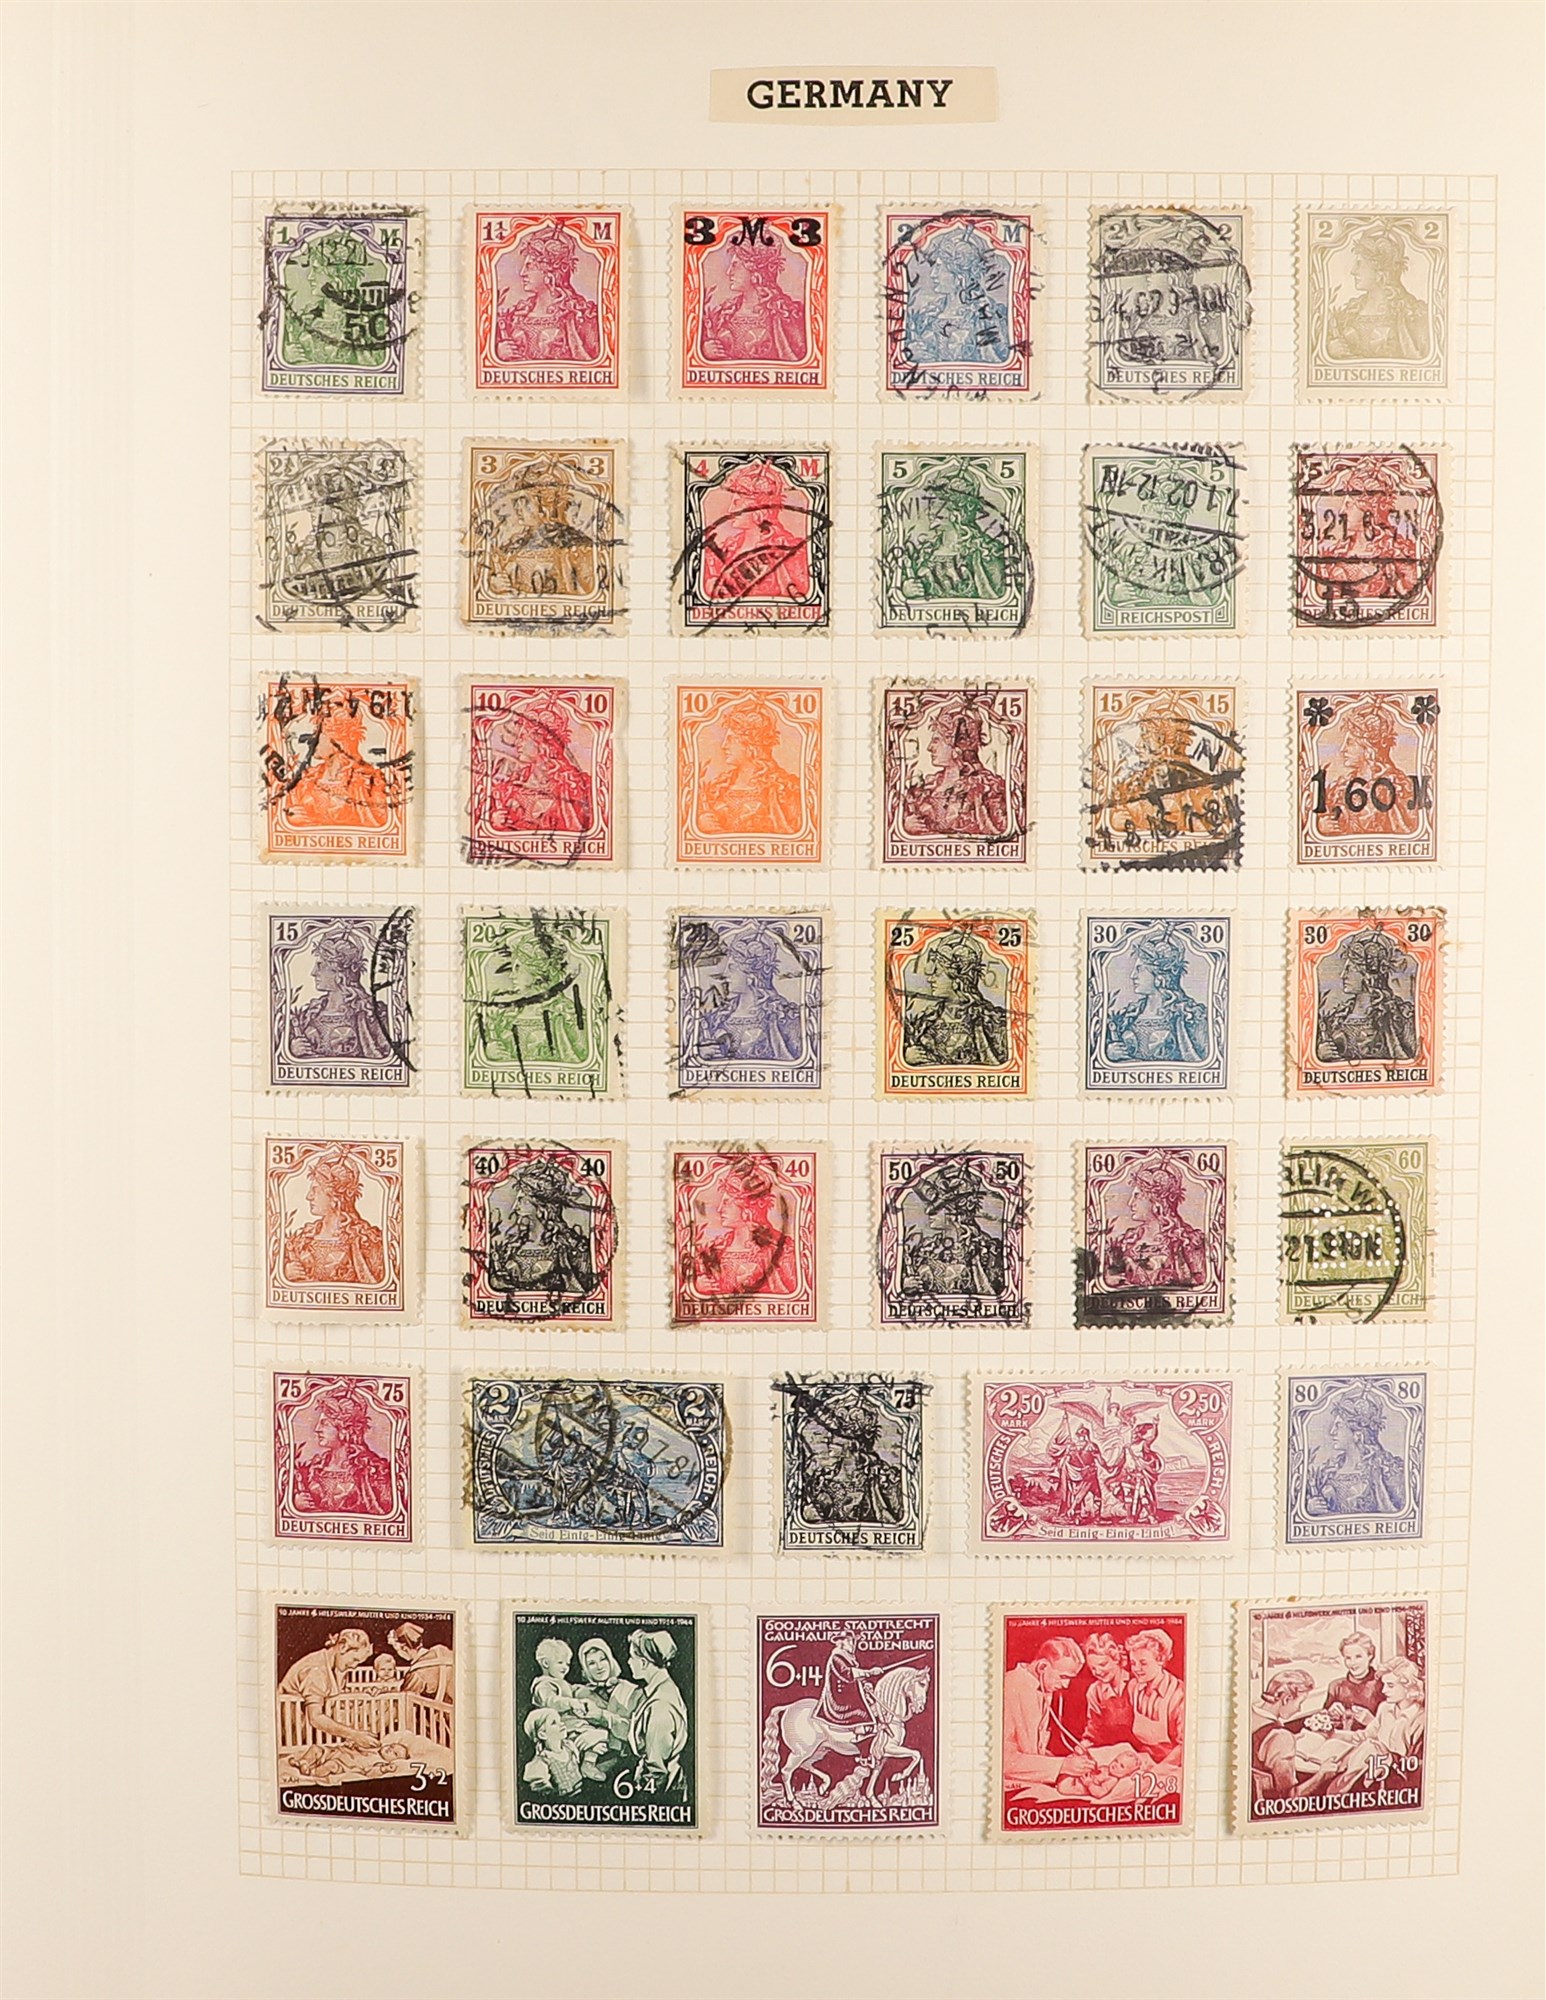 COLLECTIONS & ACCUMULATIONS WORLD "G" COUNTRIES IN AN ALBUM with mint and used incl. Germany incl. - Image 2 of 18